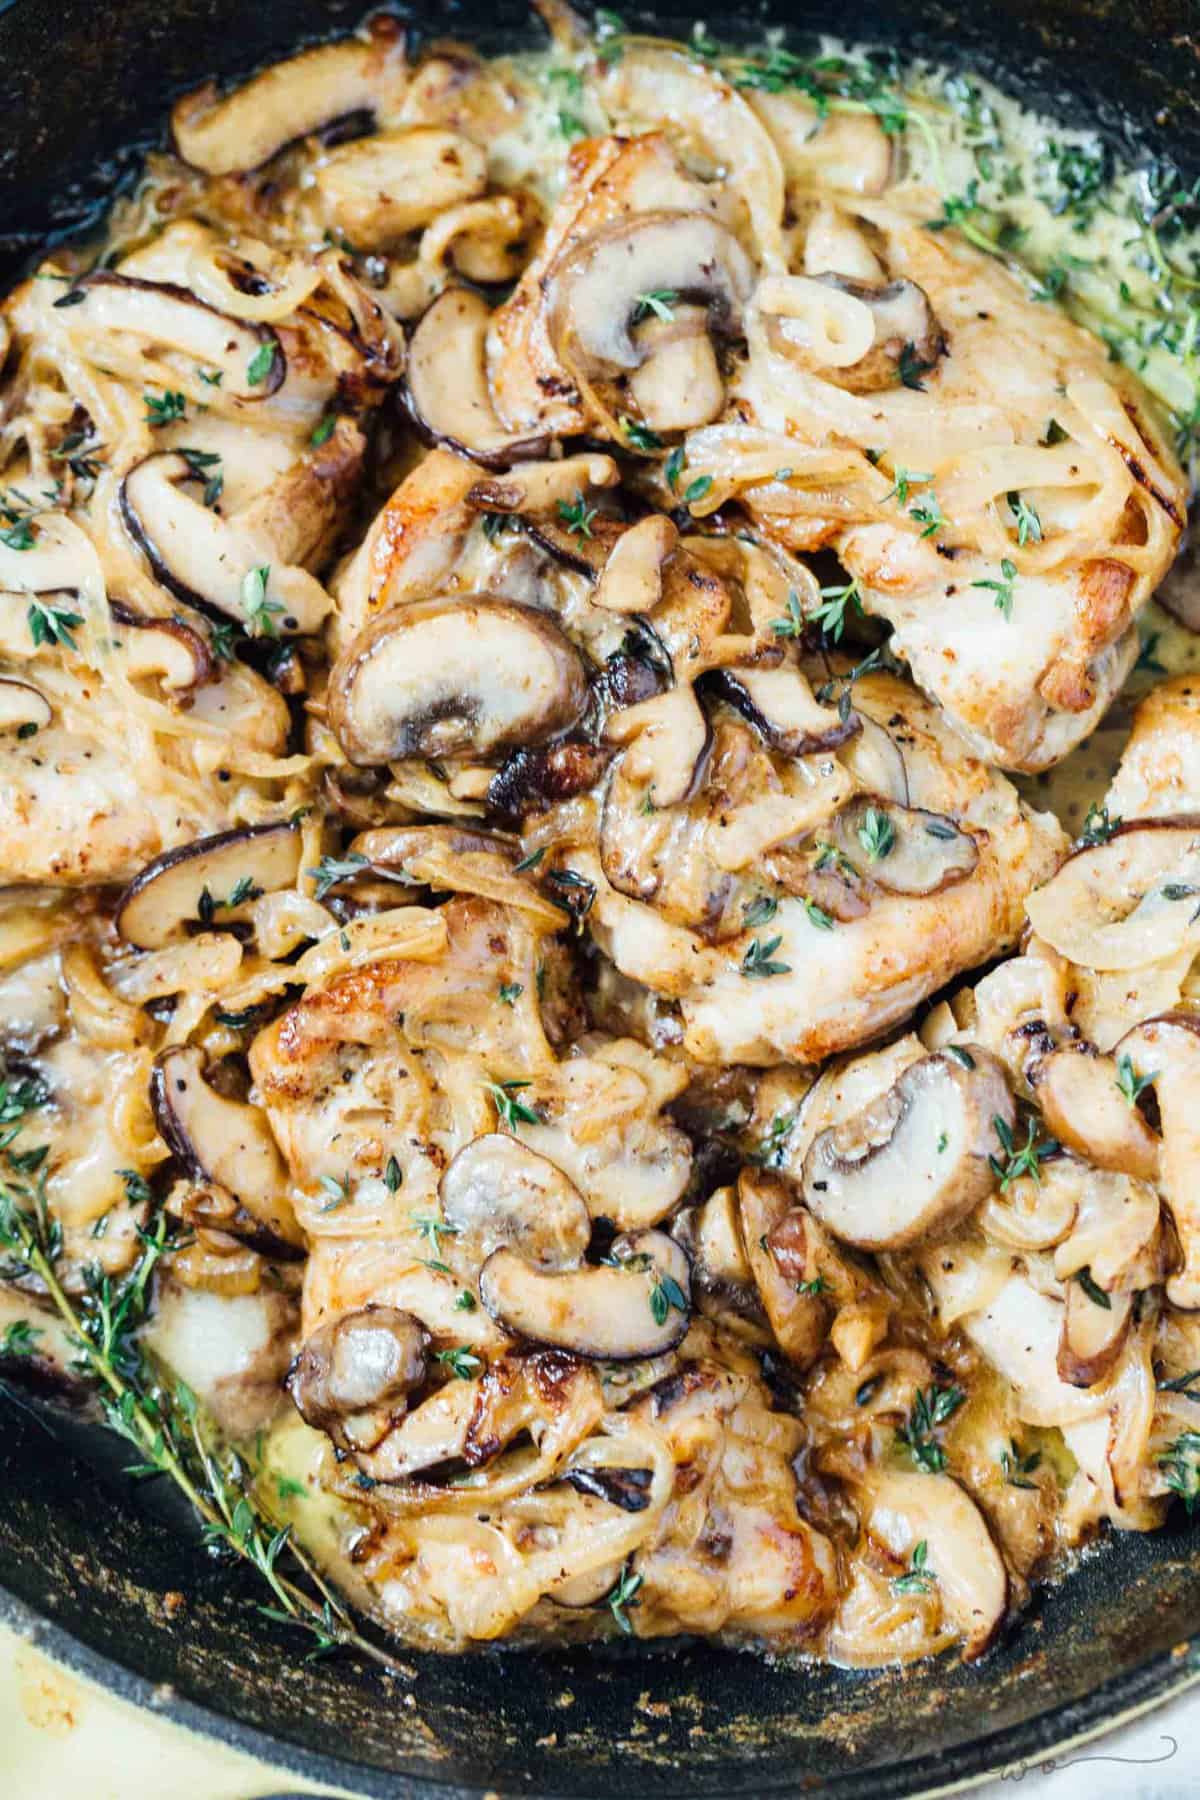 A delicious creamy skillet mushroom chicken that will make any evening fancy and full of flavor!